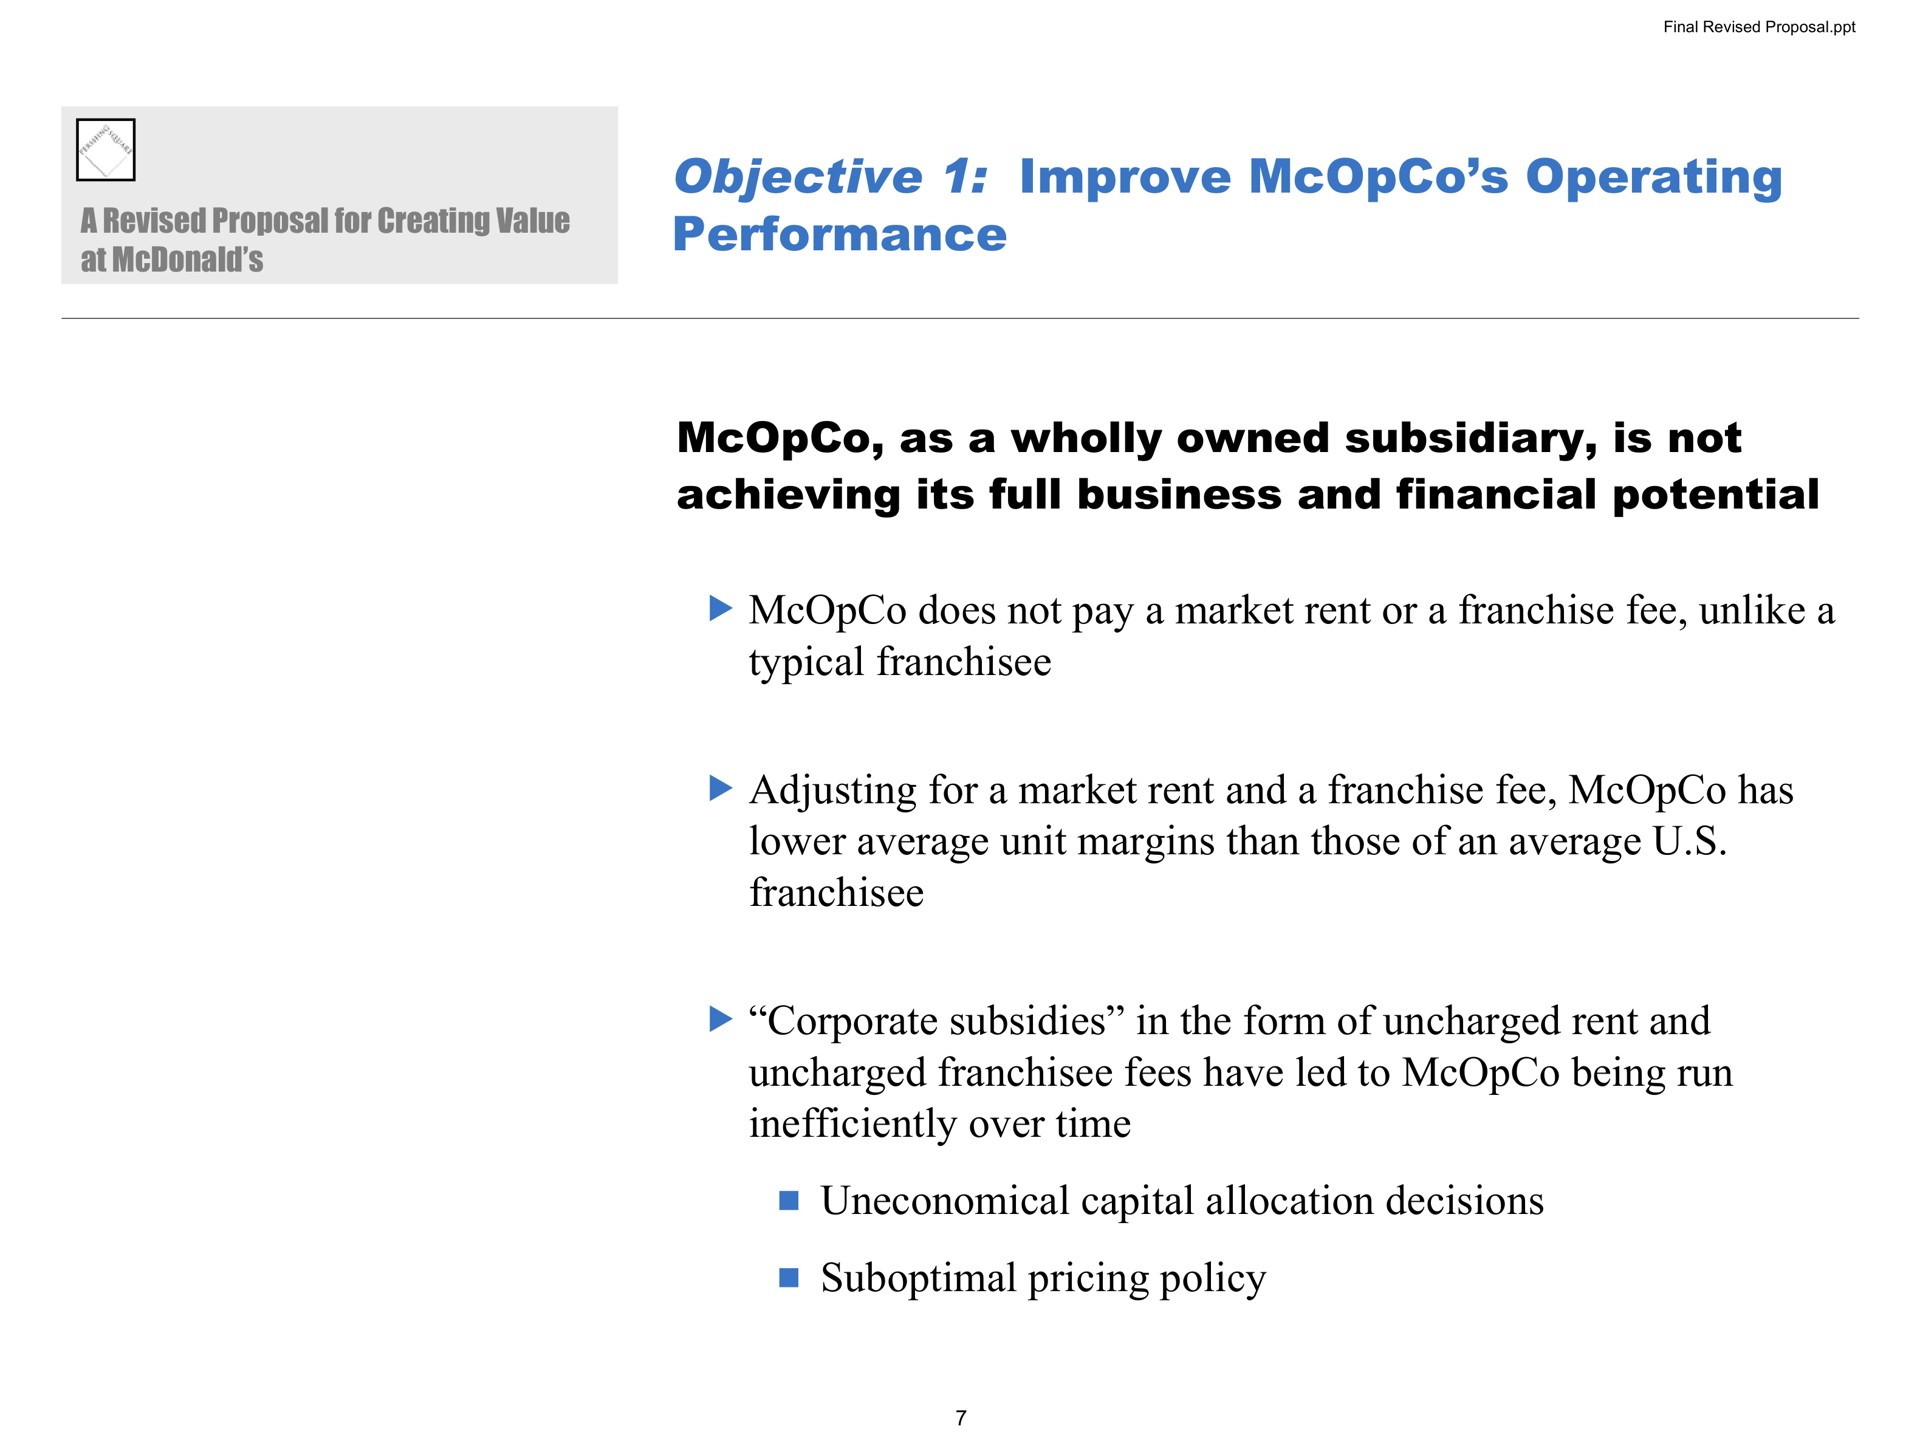 objective improve operating performance as a wholly owned subsidiary is not achieving its full business and financial potential does not pay a market rent or a franchise fee unlike a typical adjusting for a market rent and a franchise fee has lower average unit margins than those of an average corporate subsidies in the form of uncharged rent and uncharged fees have led to being run inefficiently over time uneconomical capital allocation decisions suboptimal pricing policy | Pershing Square